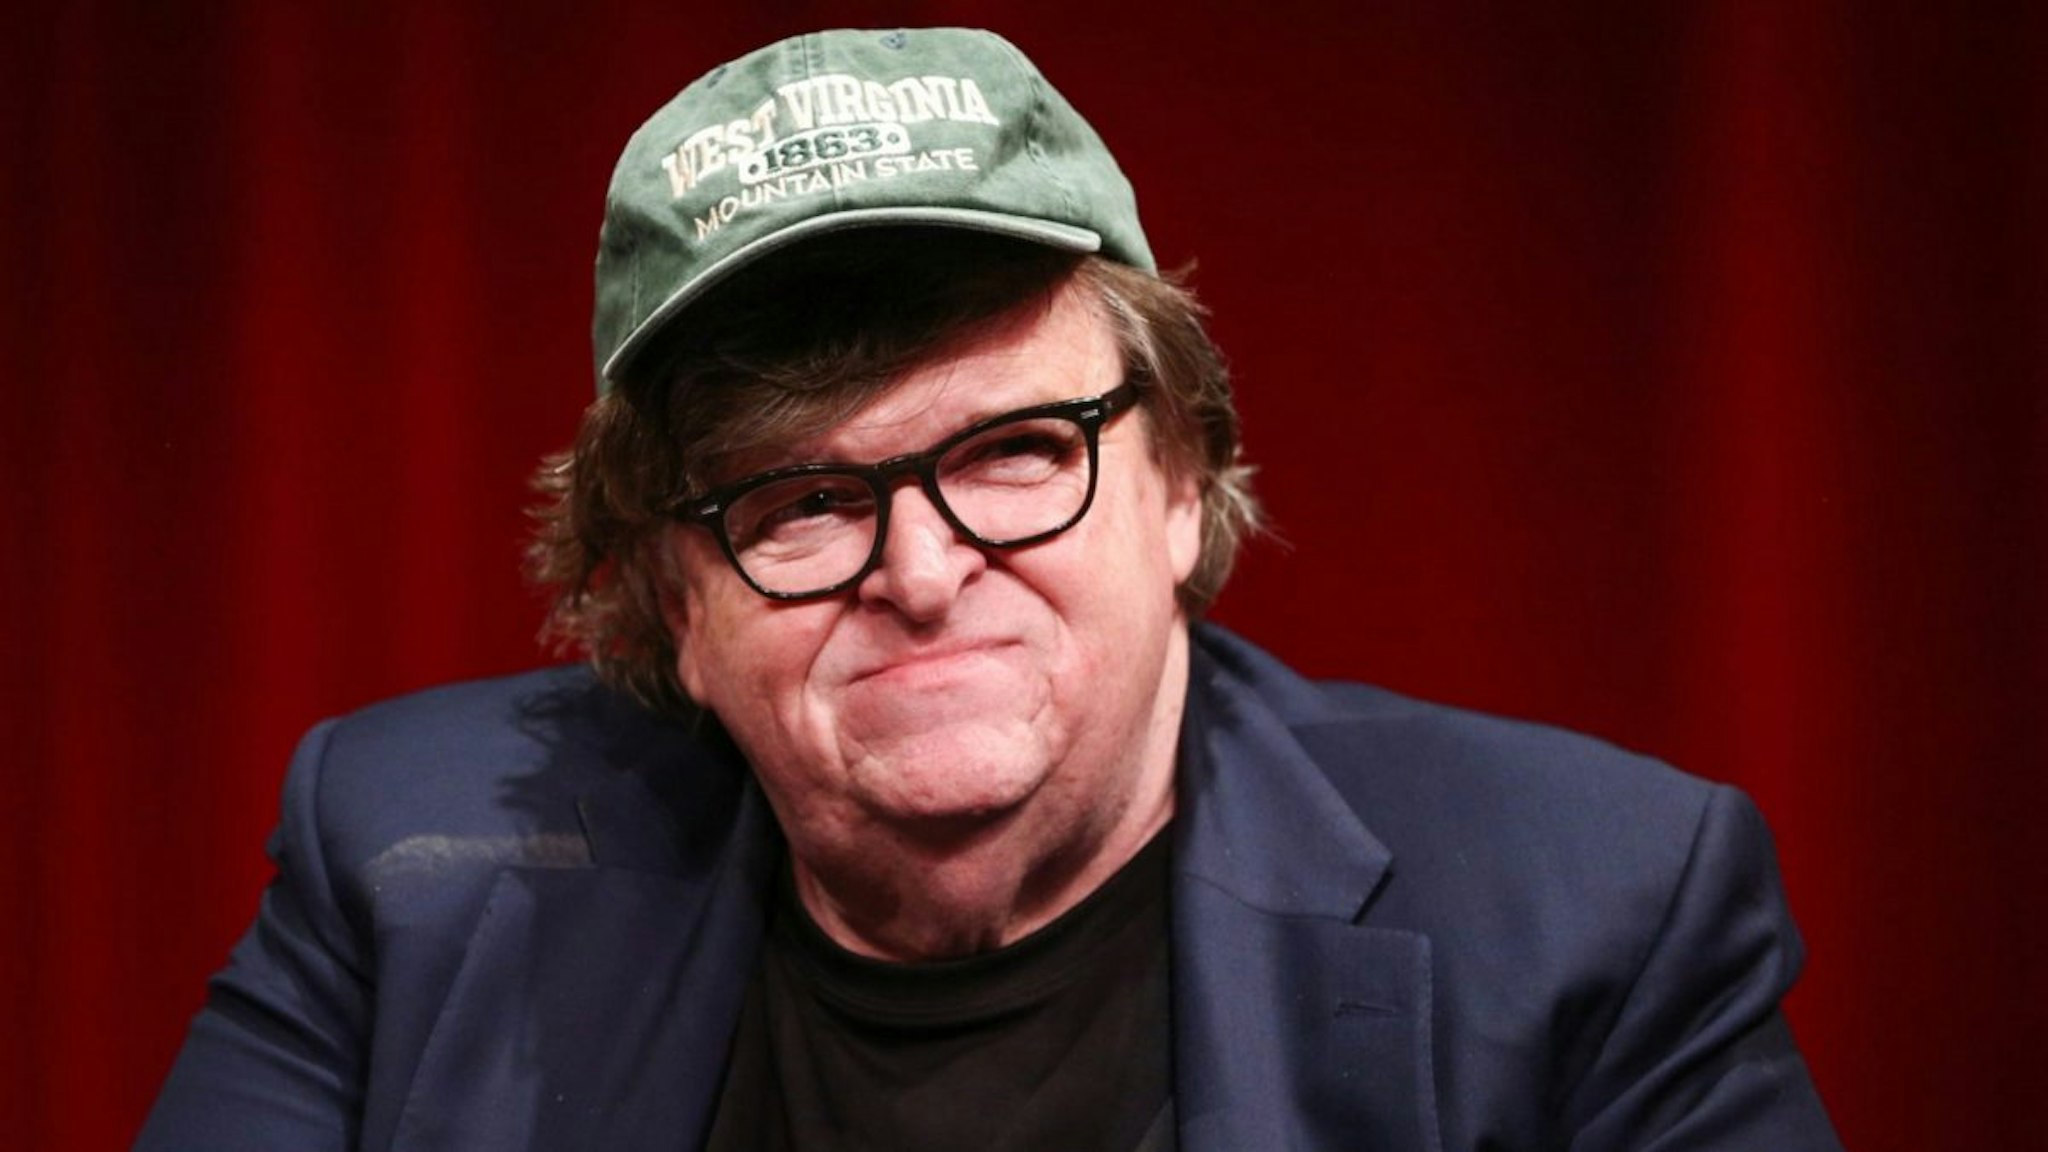 Michael Moore attends the premiere of Briarcliff Entertainment's "Fahrenheit 11/9" at Samuel Goldwyn Theater on September 19, 2018 in Beverly Hills, California.